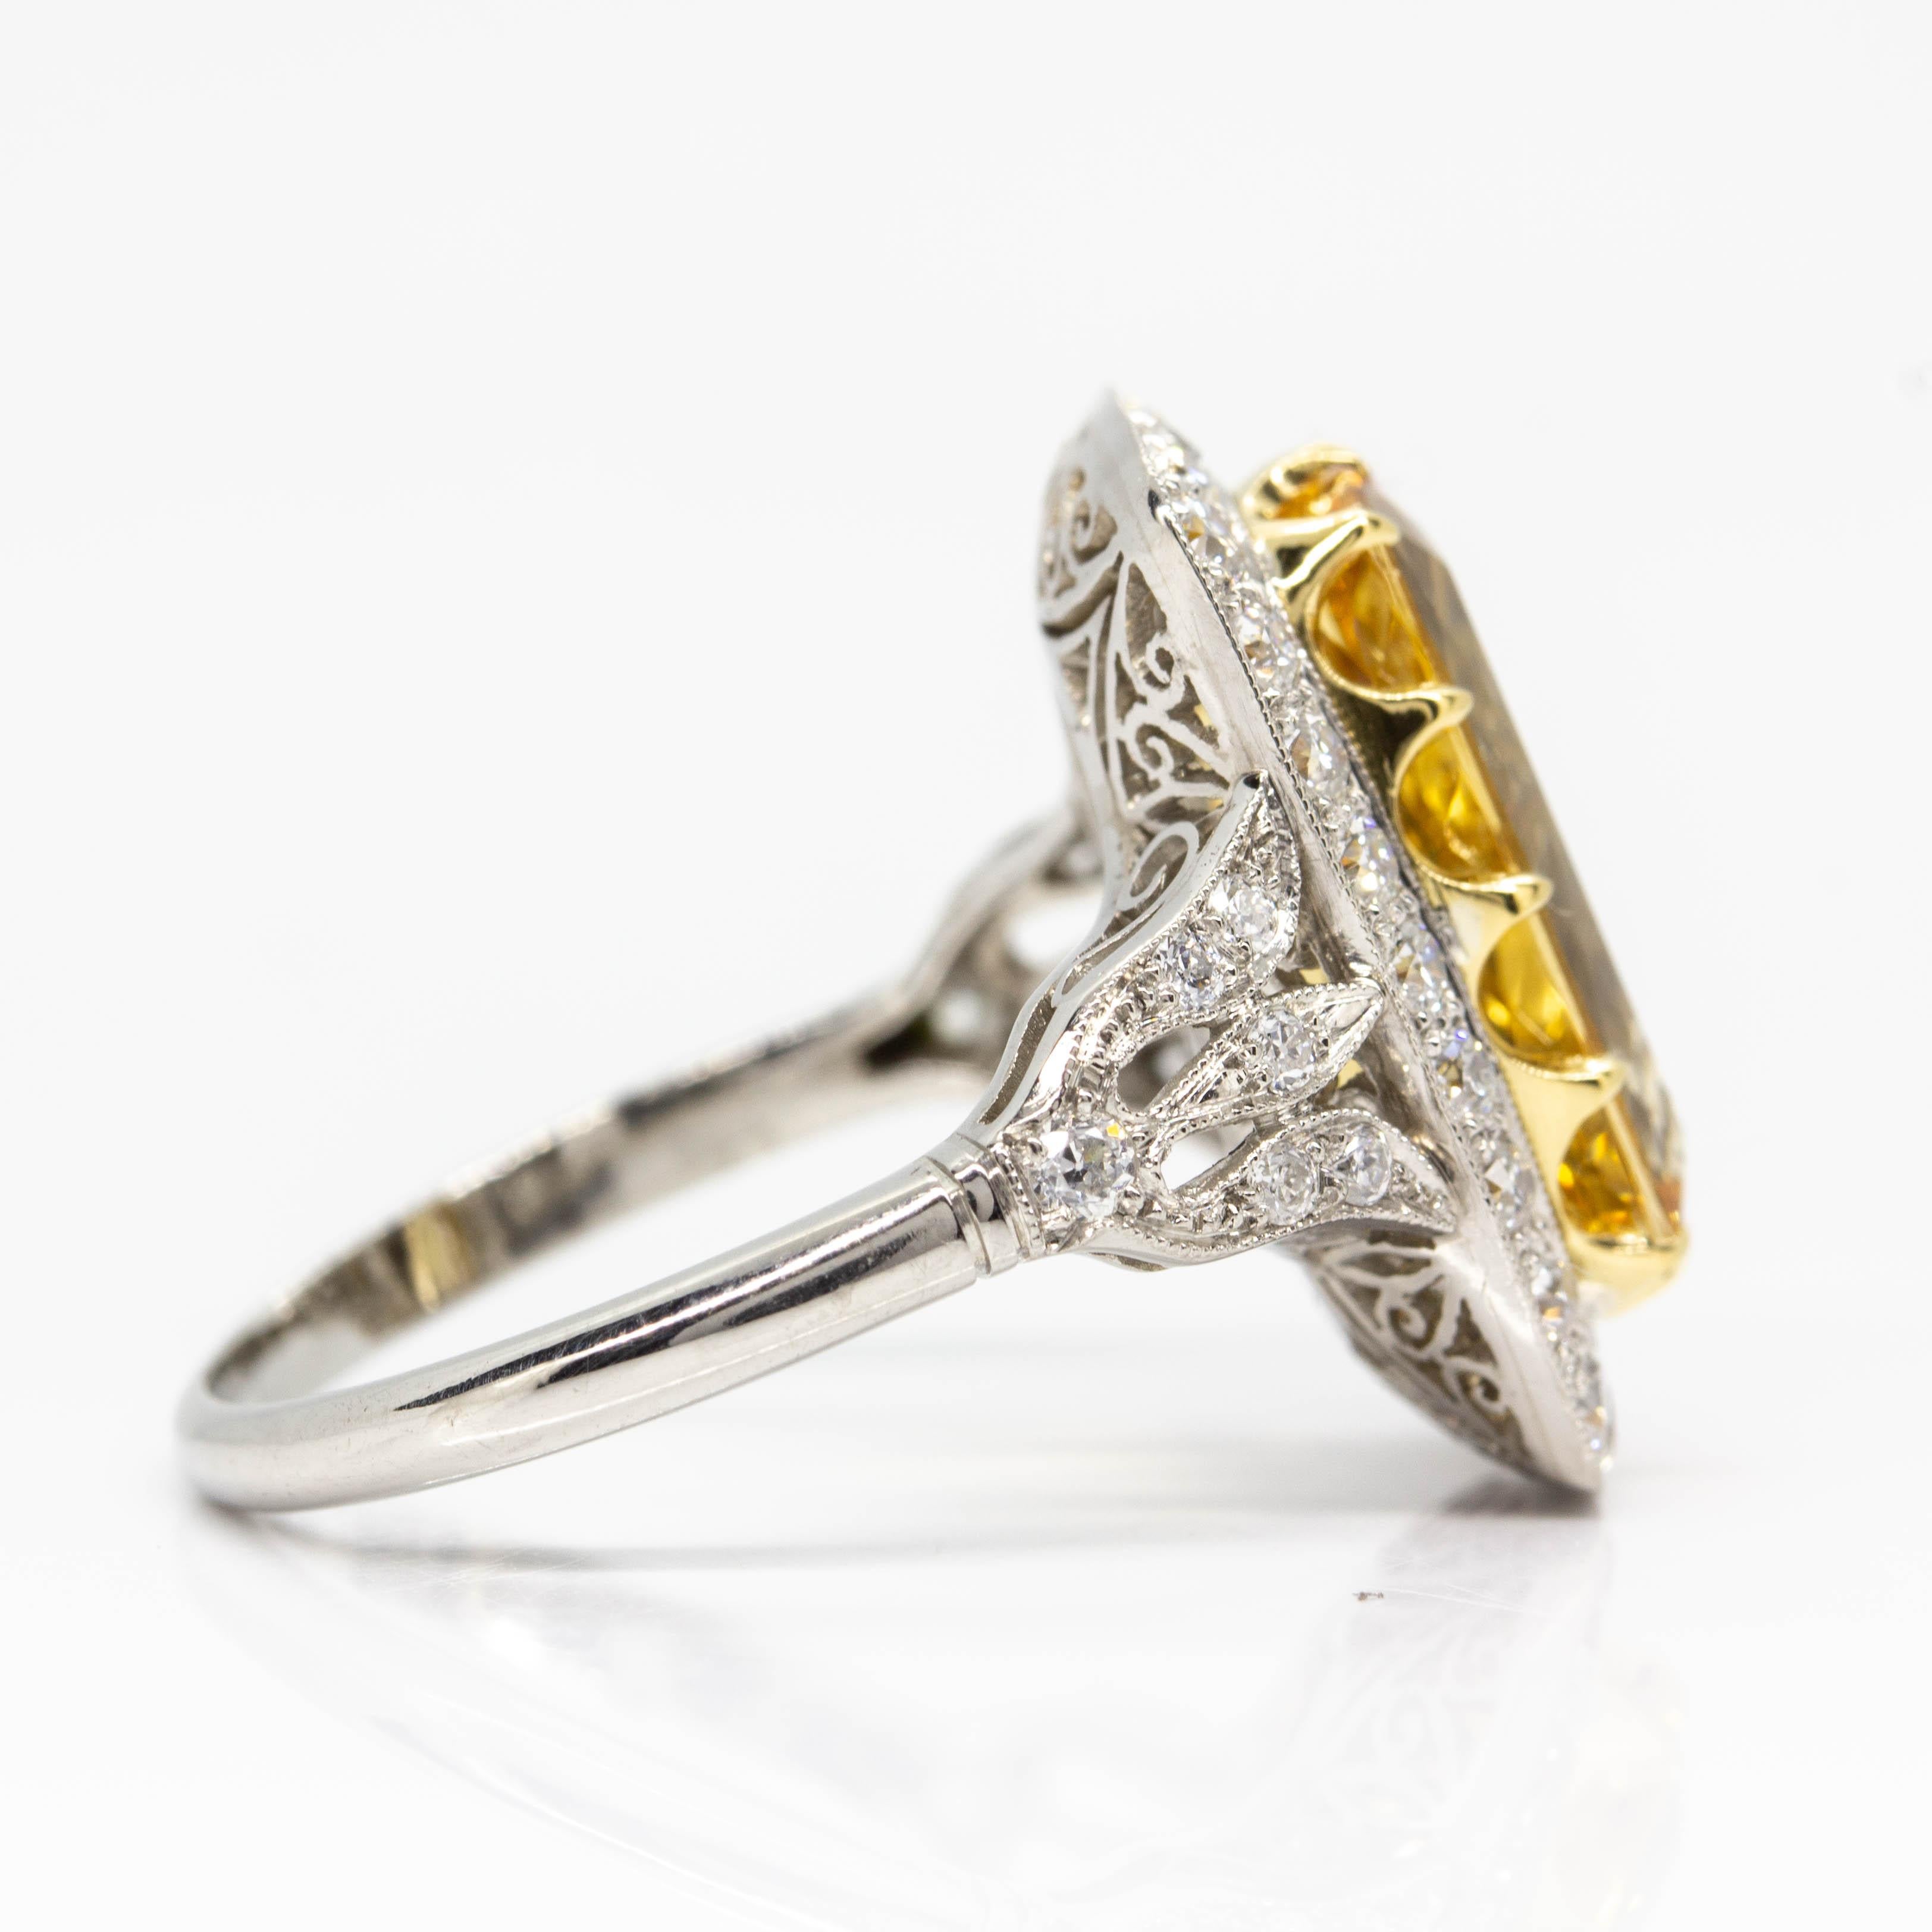 One yellow topaz weighing 4.75ctw radiated from the center of this exquisite ring.
Its stunning halo that surrounds the central stone is composed of 0.70ctw of 34 H-VS2-quality old mine cut diamonds.
The dazzling diamonds continue glittering on the